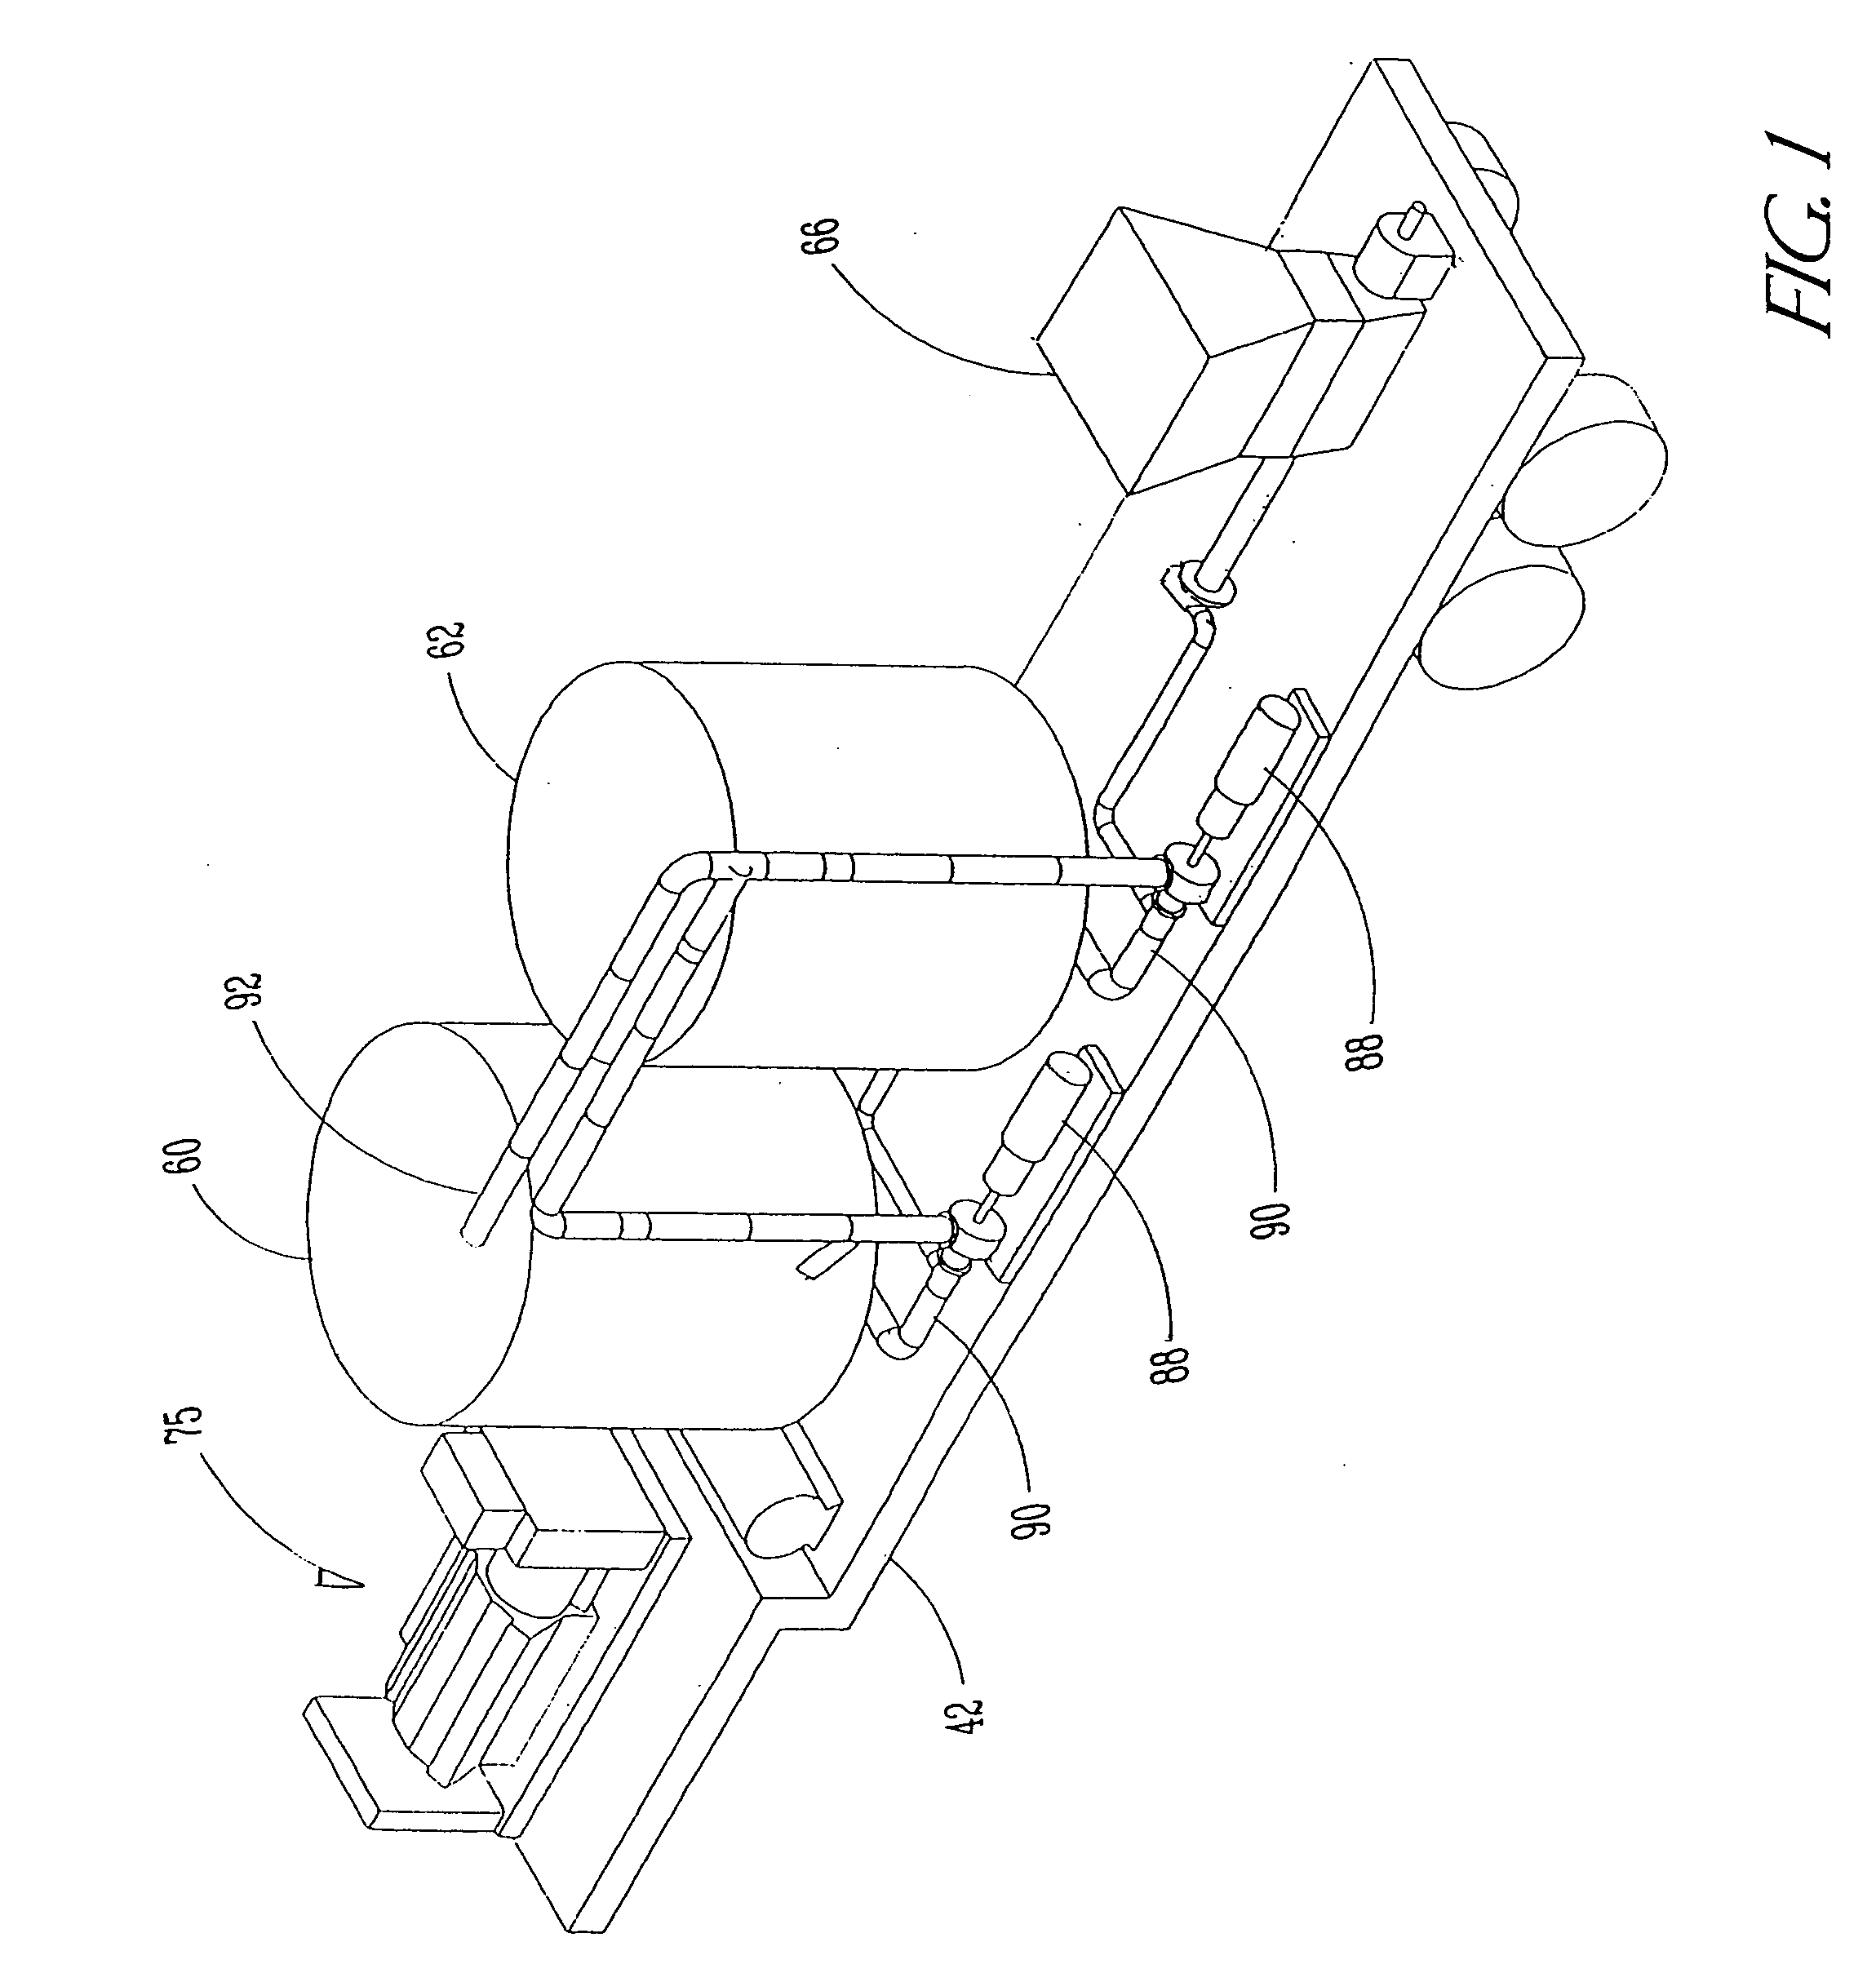 Apparatus for natural recycling of protein waste